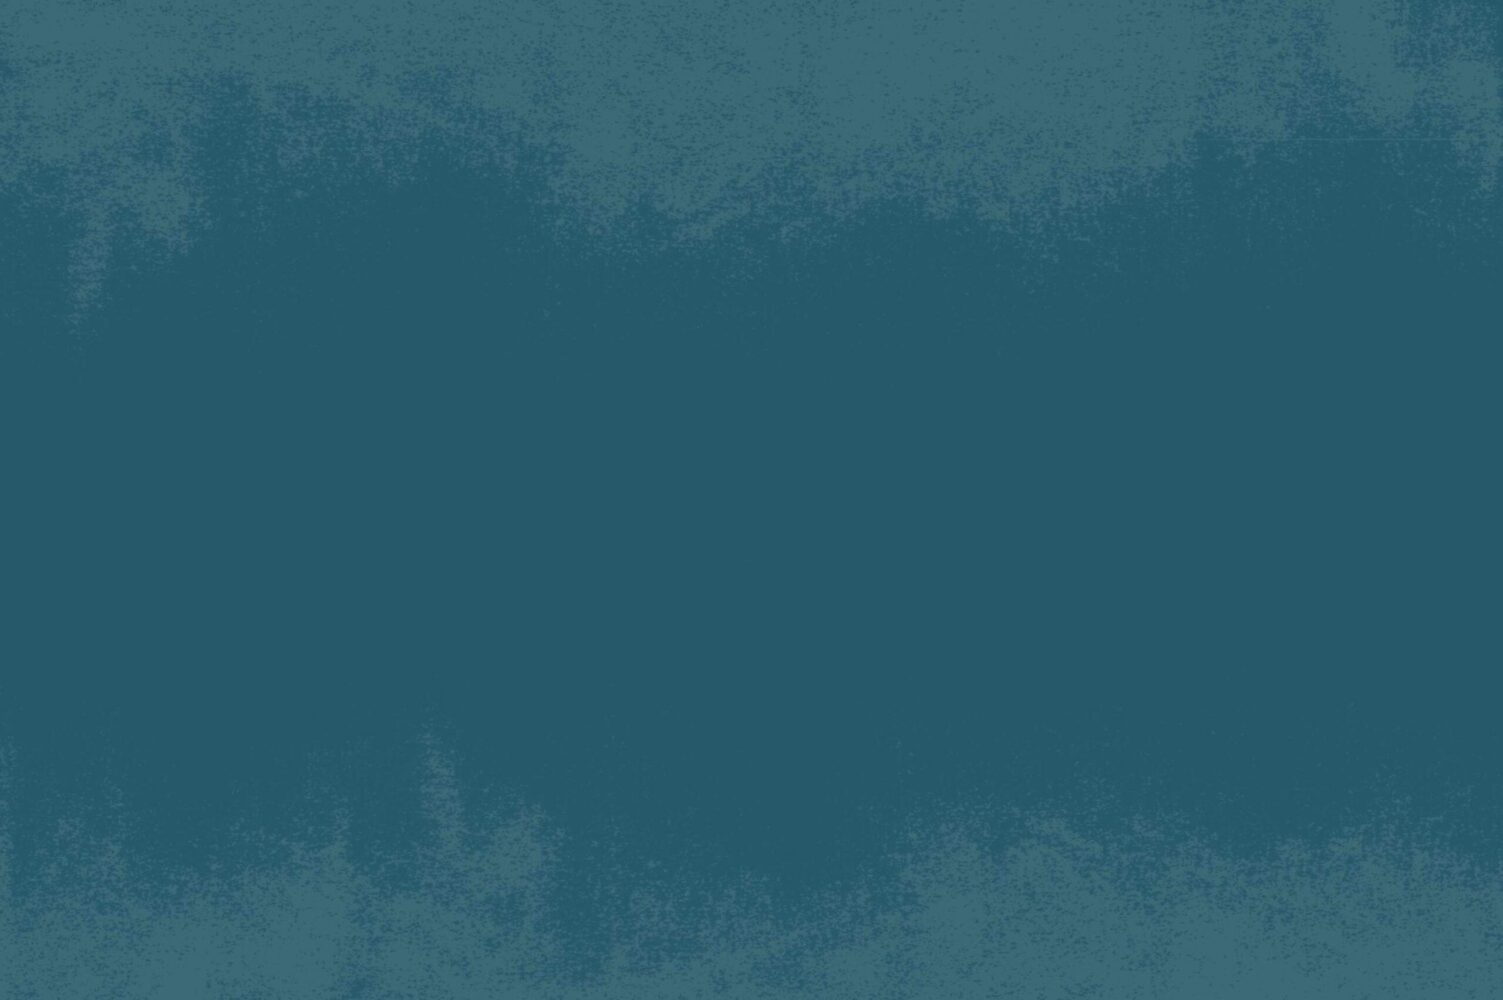 Plain blue banner with texture